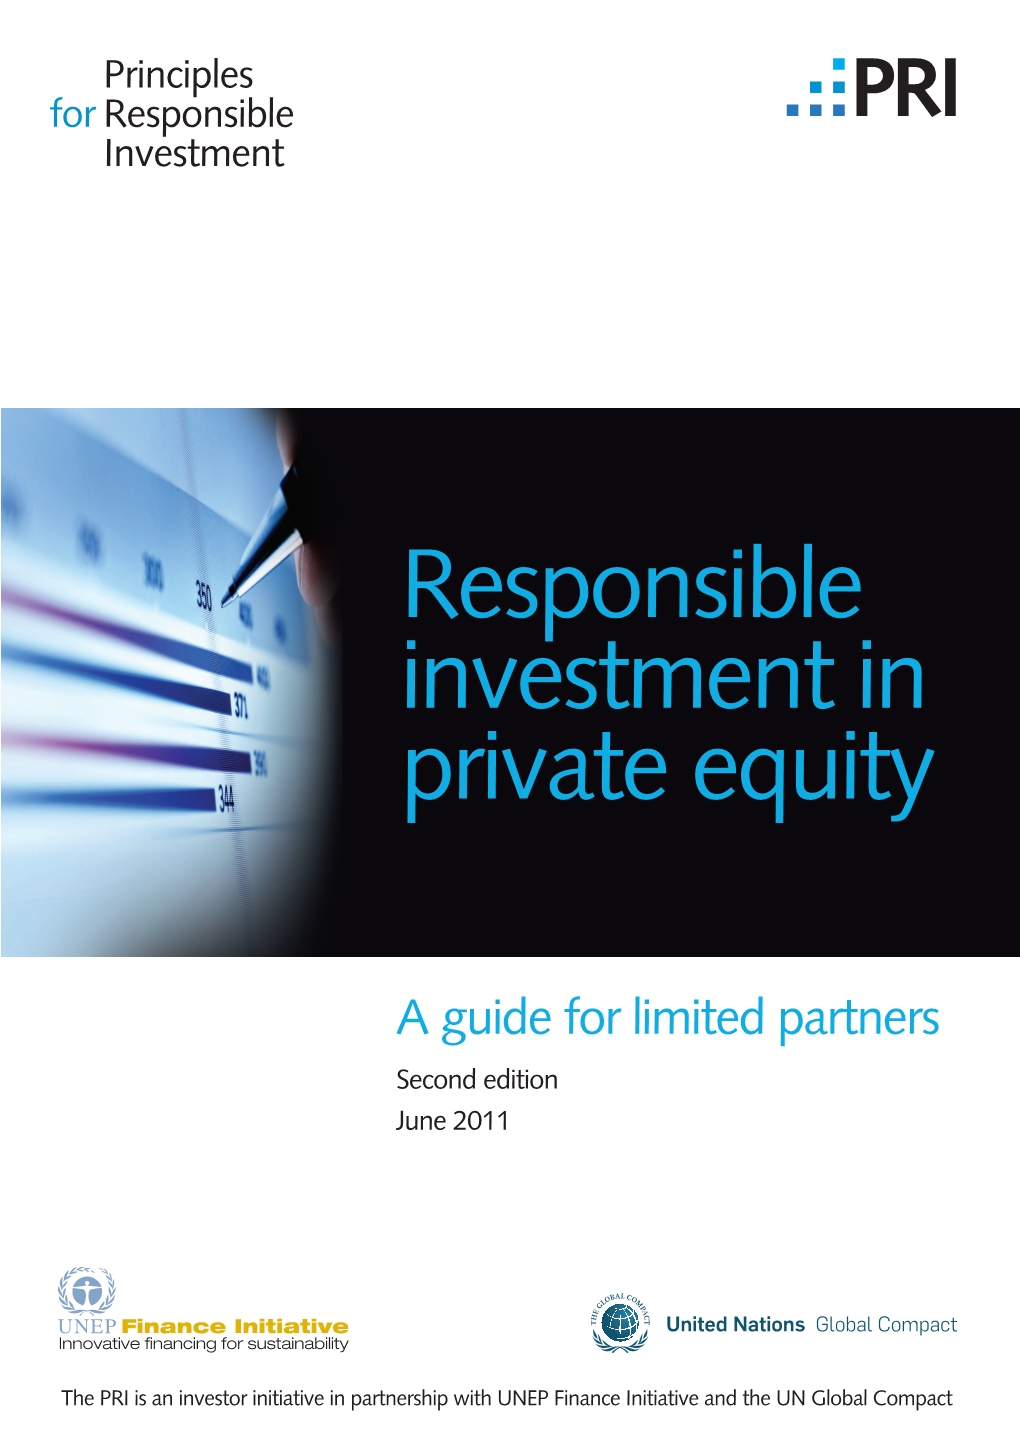 Responsible Investment in Private Equity: a Guide for Limited Partners